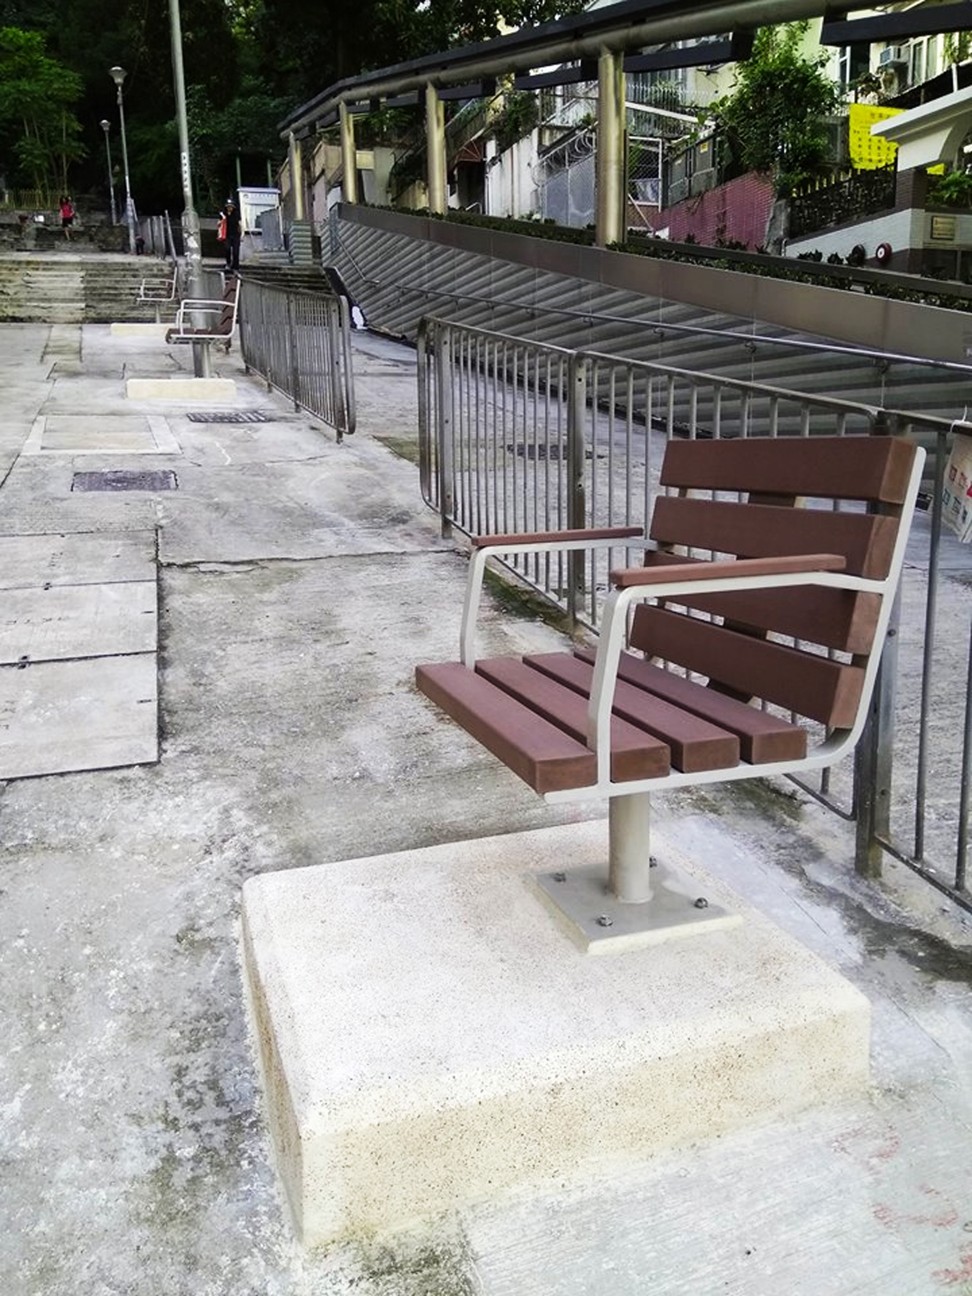 You can’t take a friend to this seat in Kennedy Town. Photo: Handout